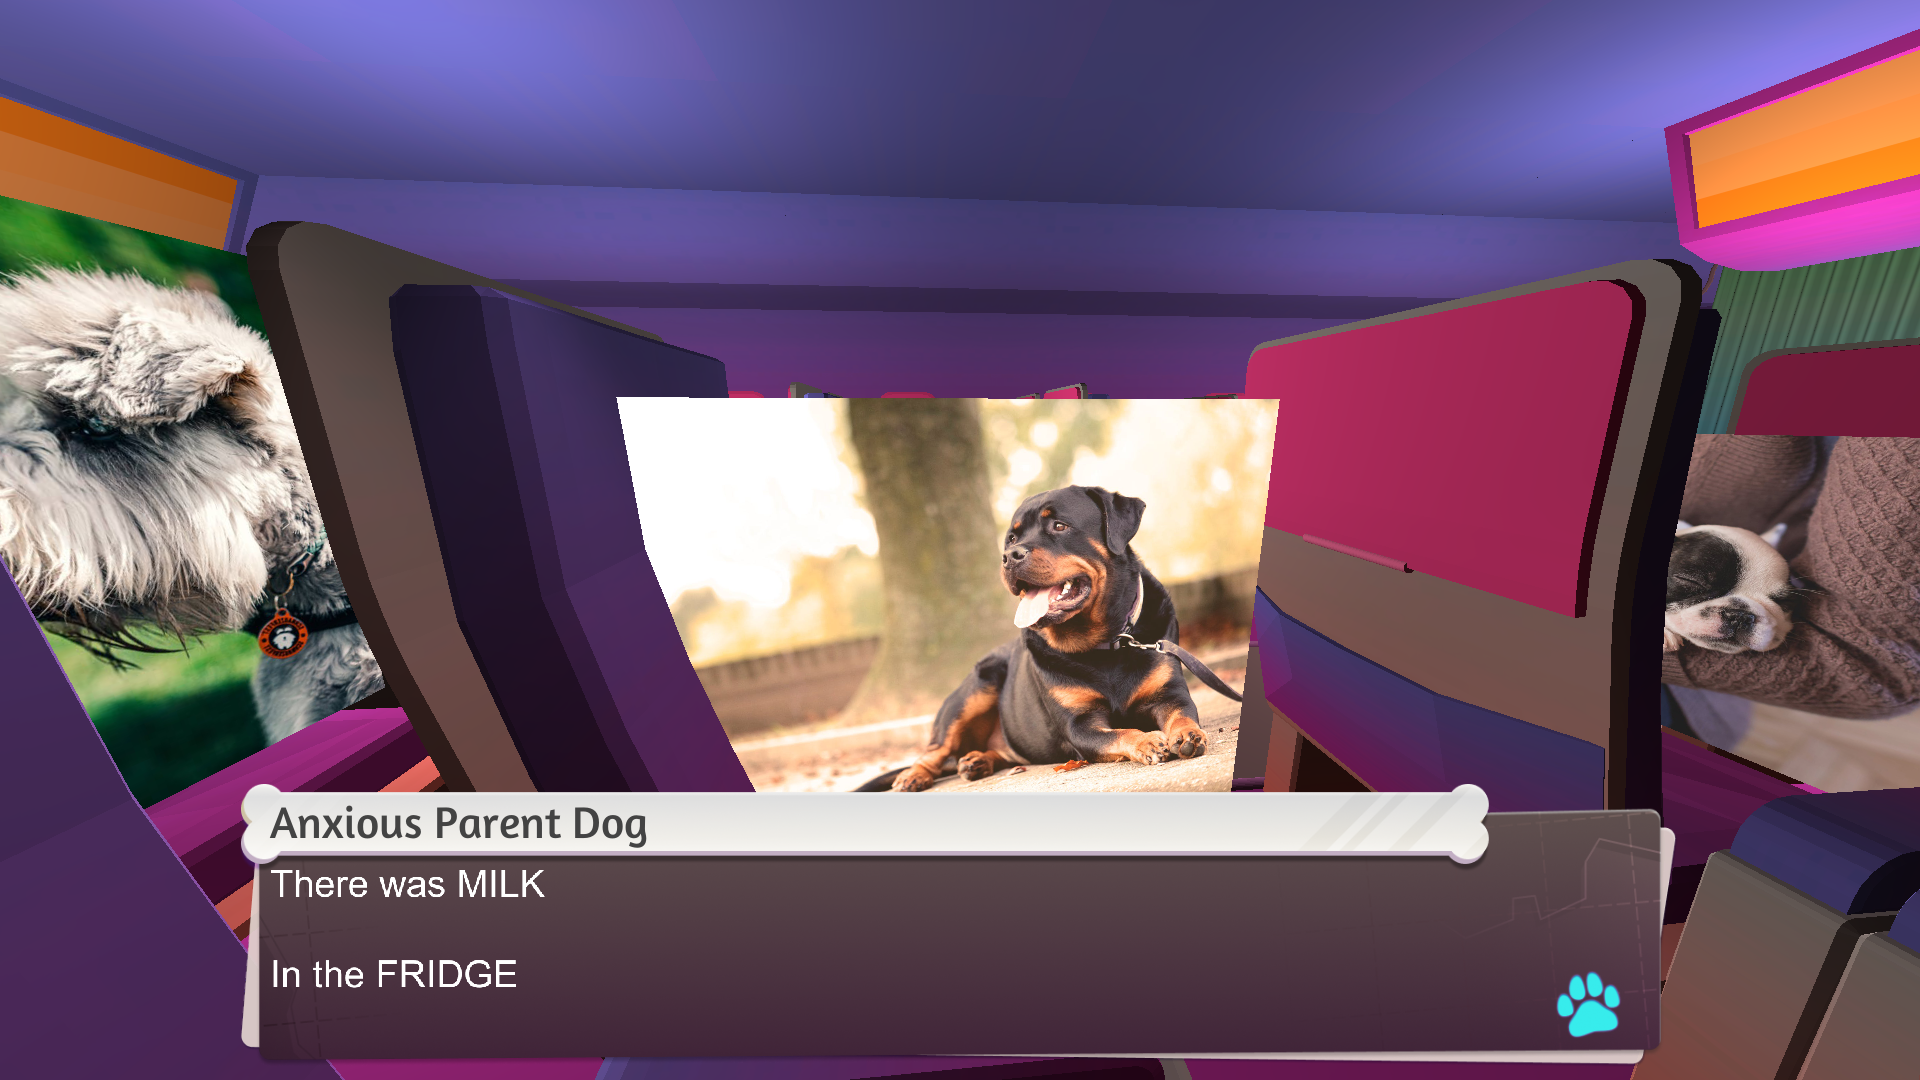 dialogue with a stock photo dog in dog airport game